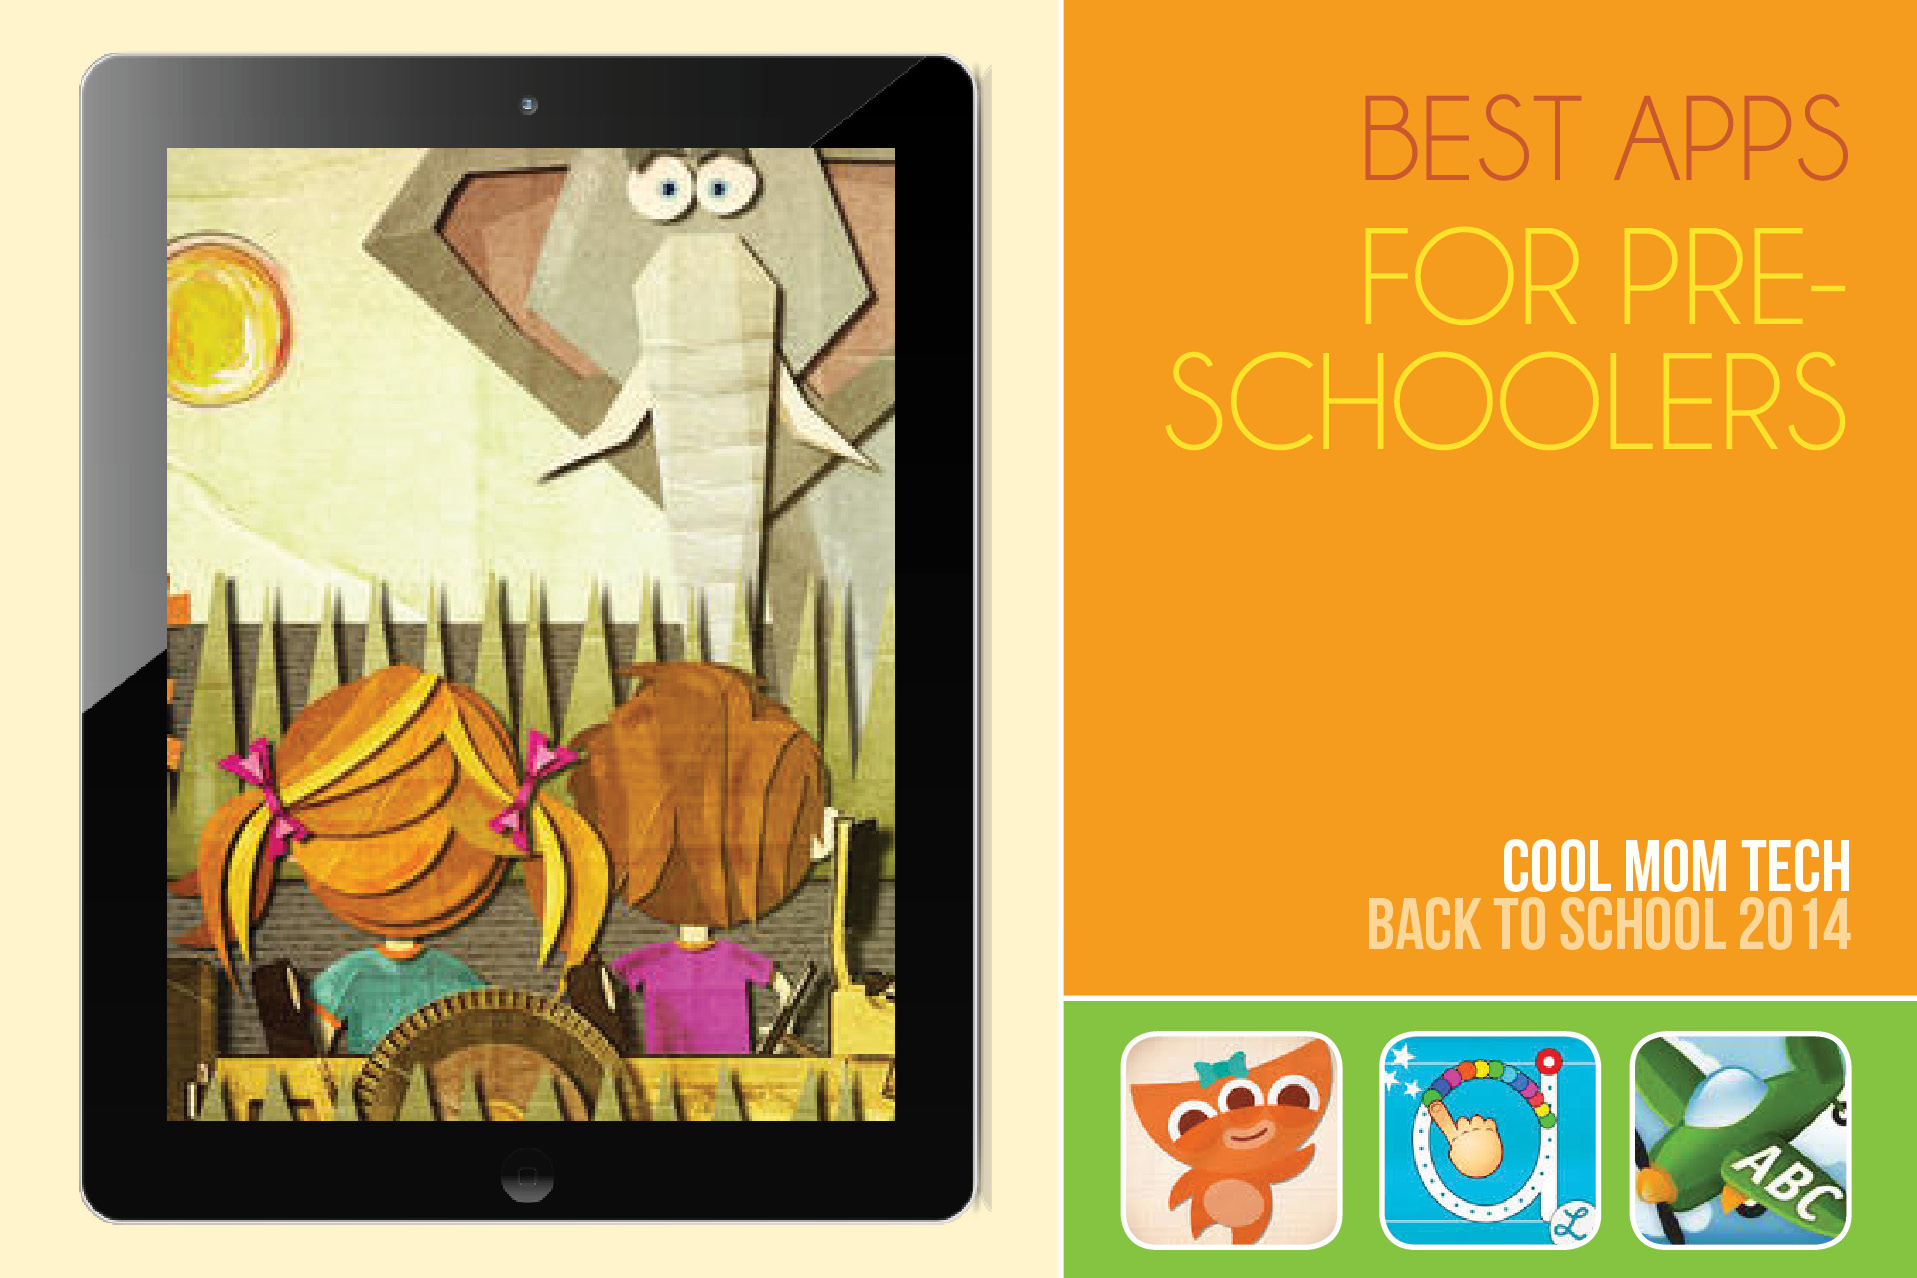 12 of the best educational apps for preschoolers: Back to School Tech Guide 2014